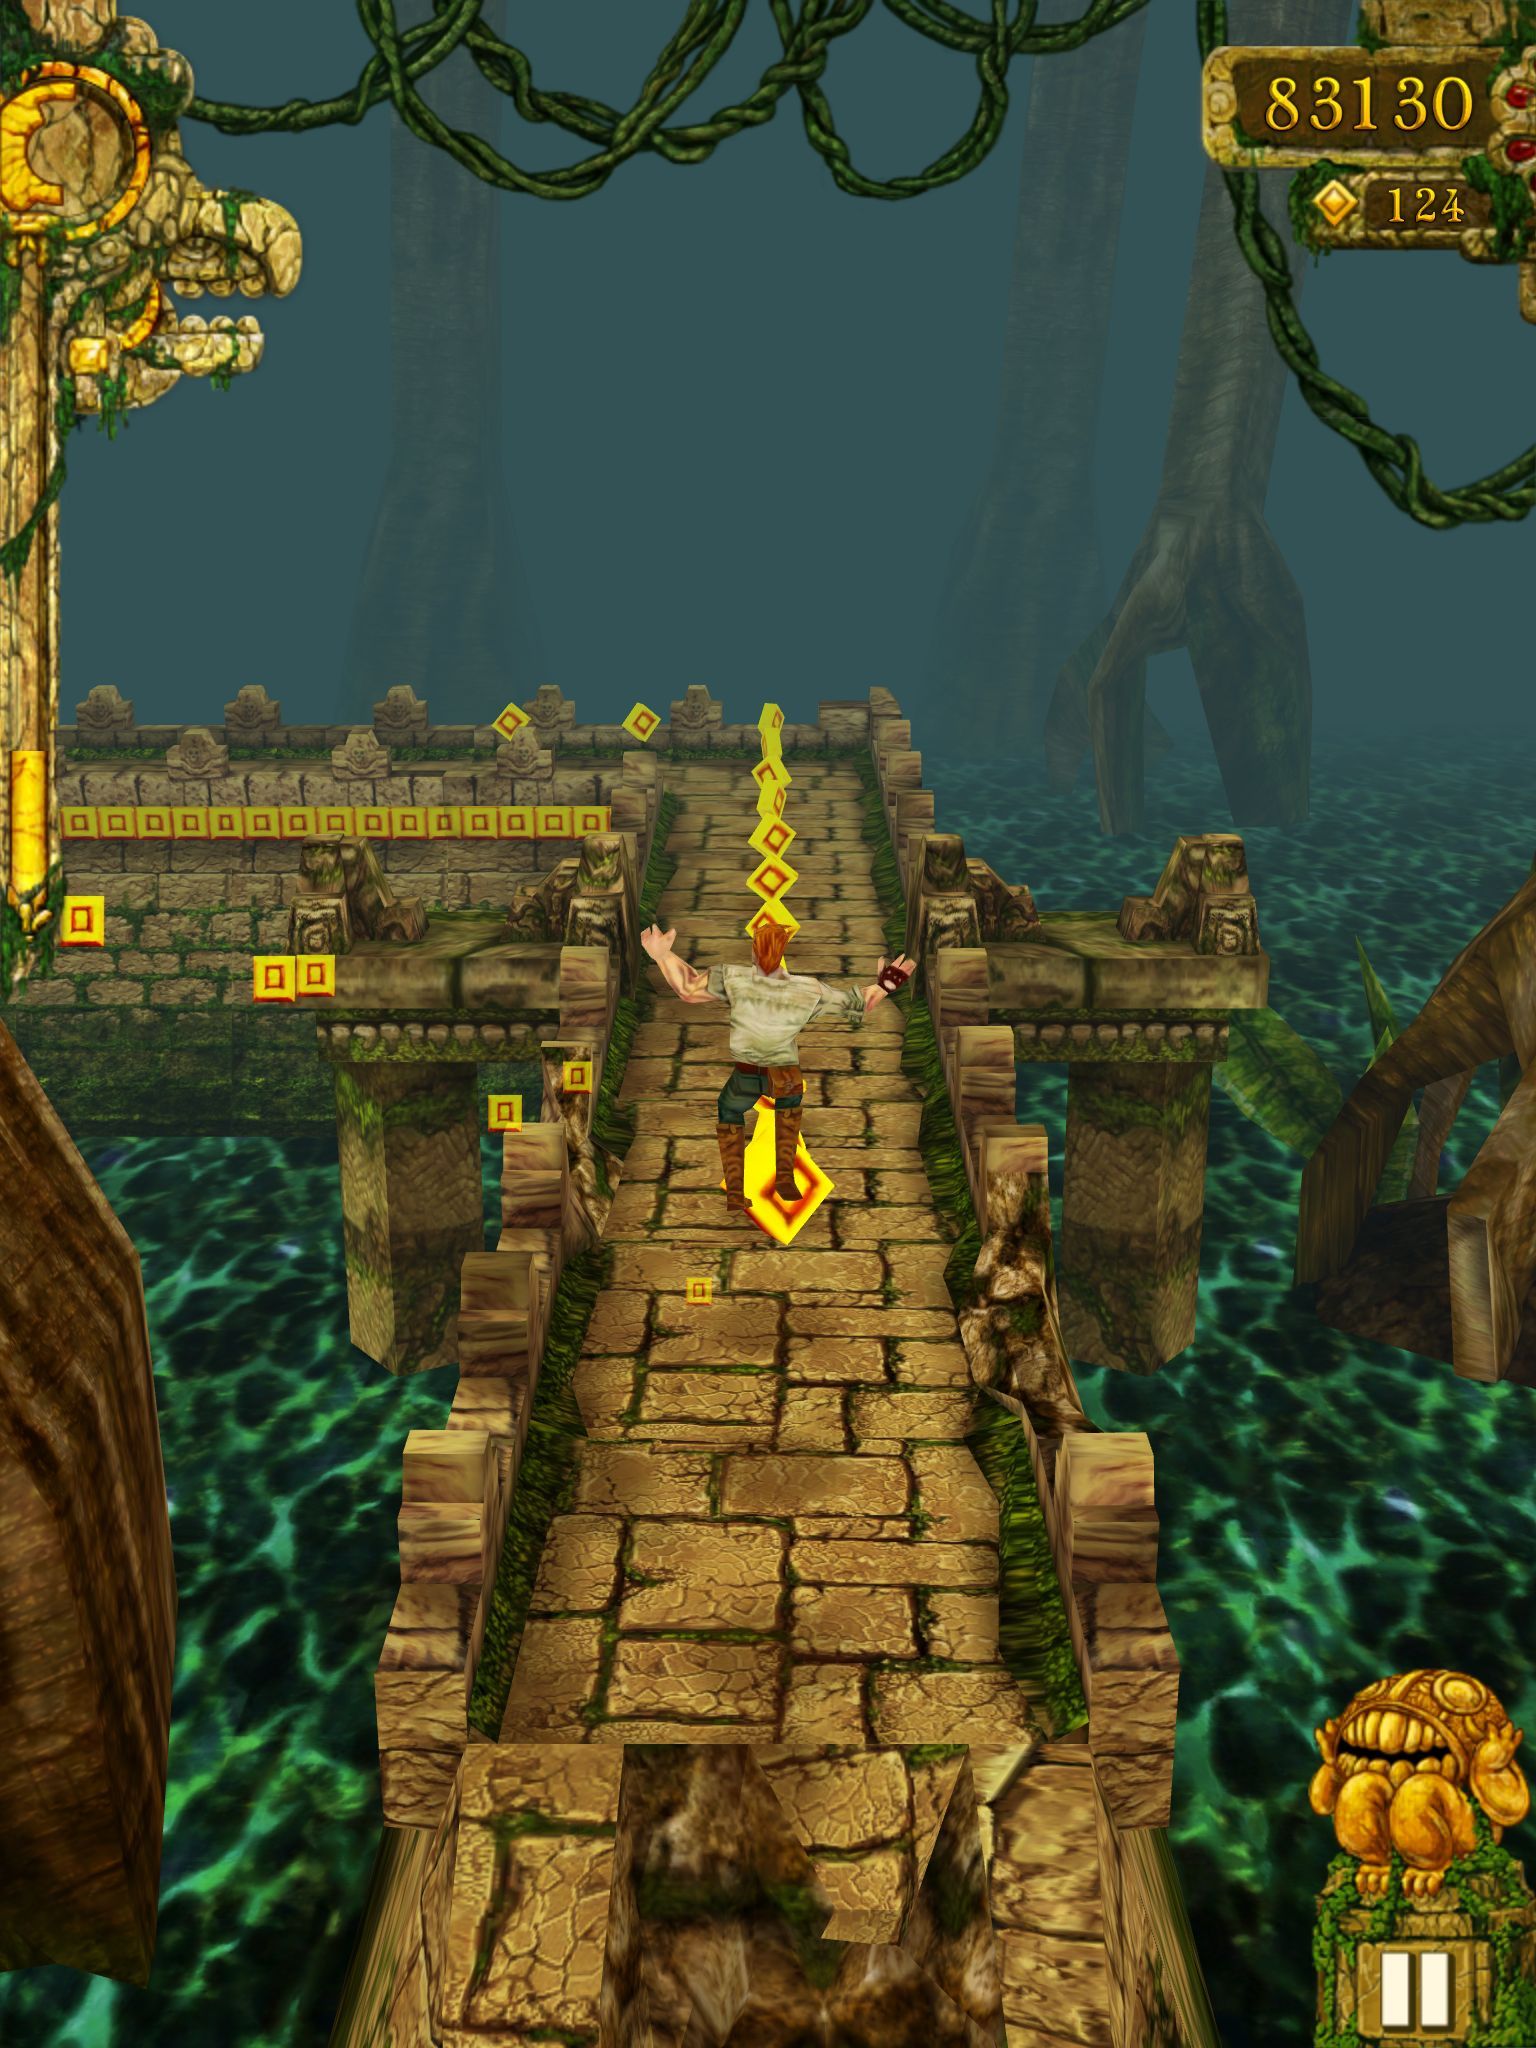 Download game for temple run - Temple run - download and play free